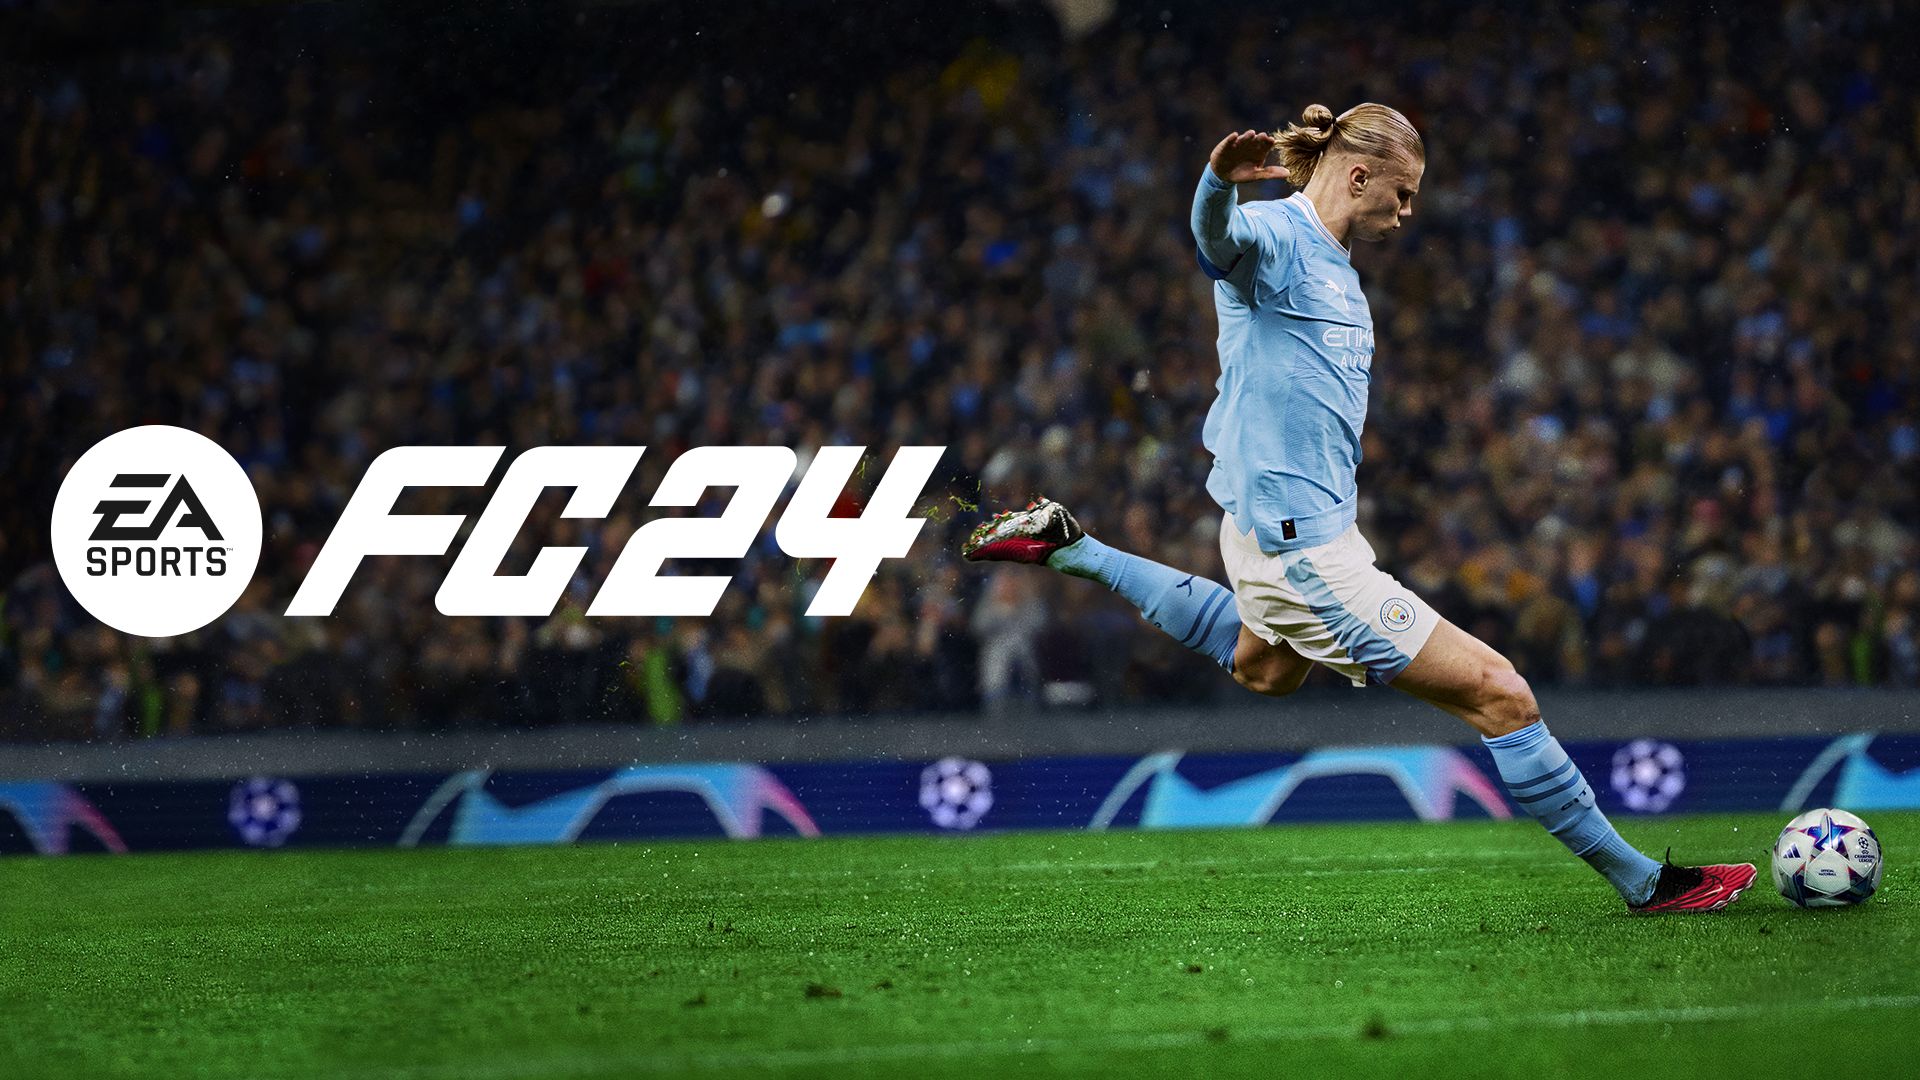 Welcome To The Club: A Look Into The First 24 Days Of EA SPORTS FC 24